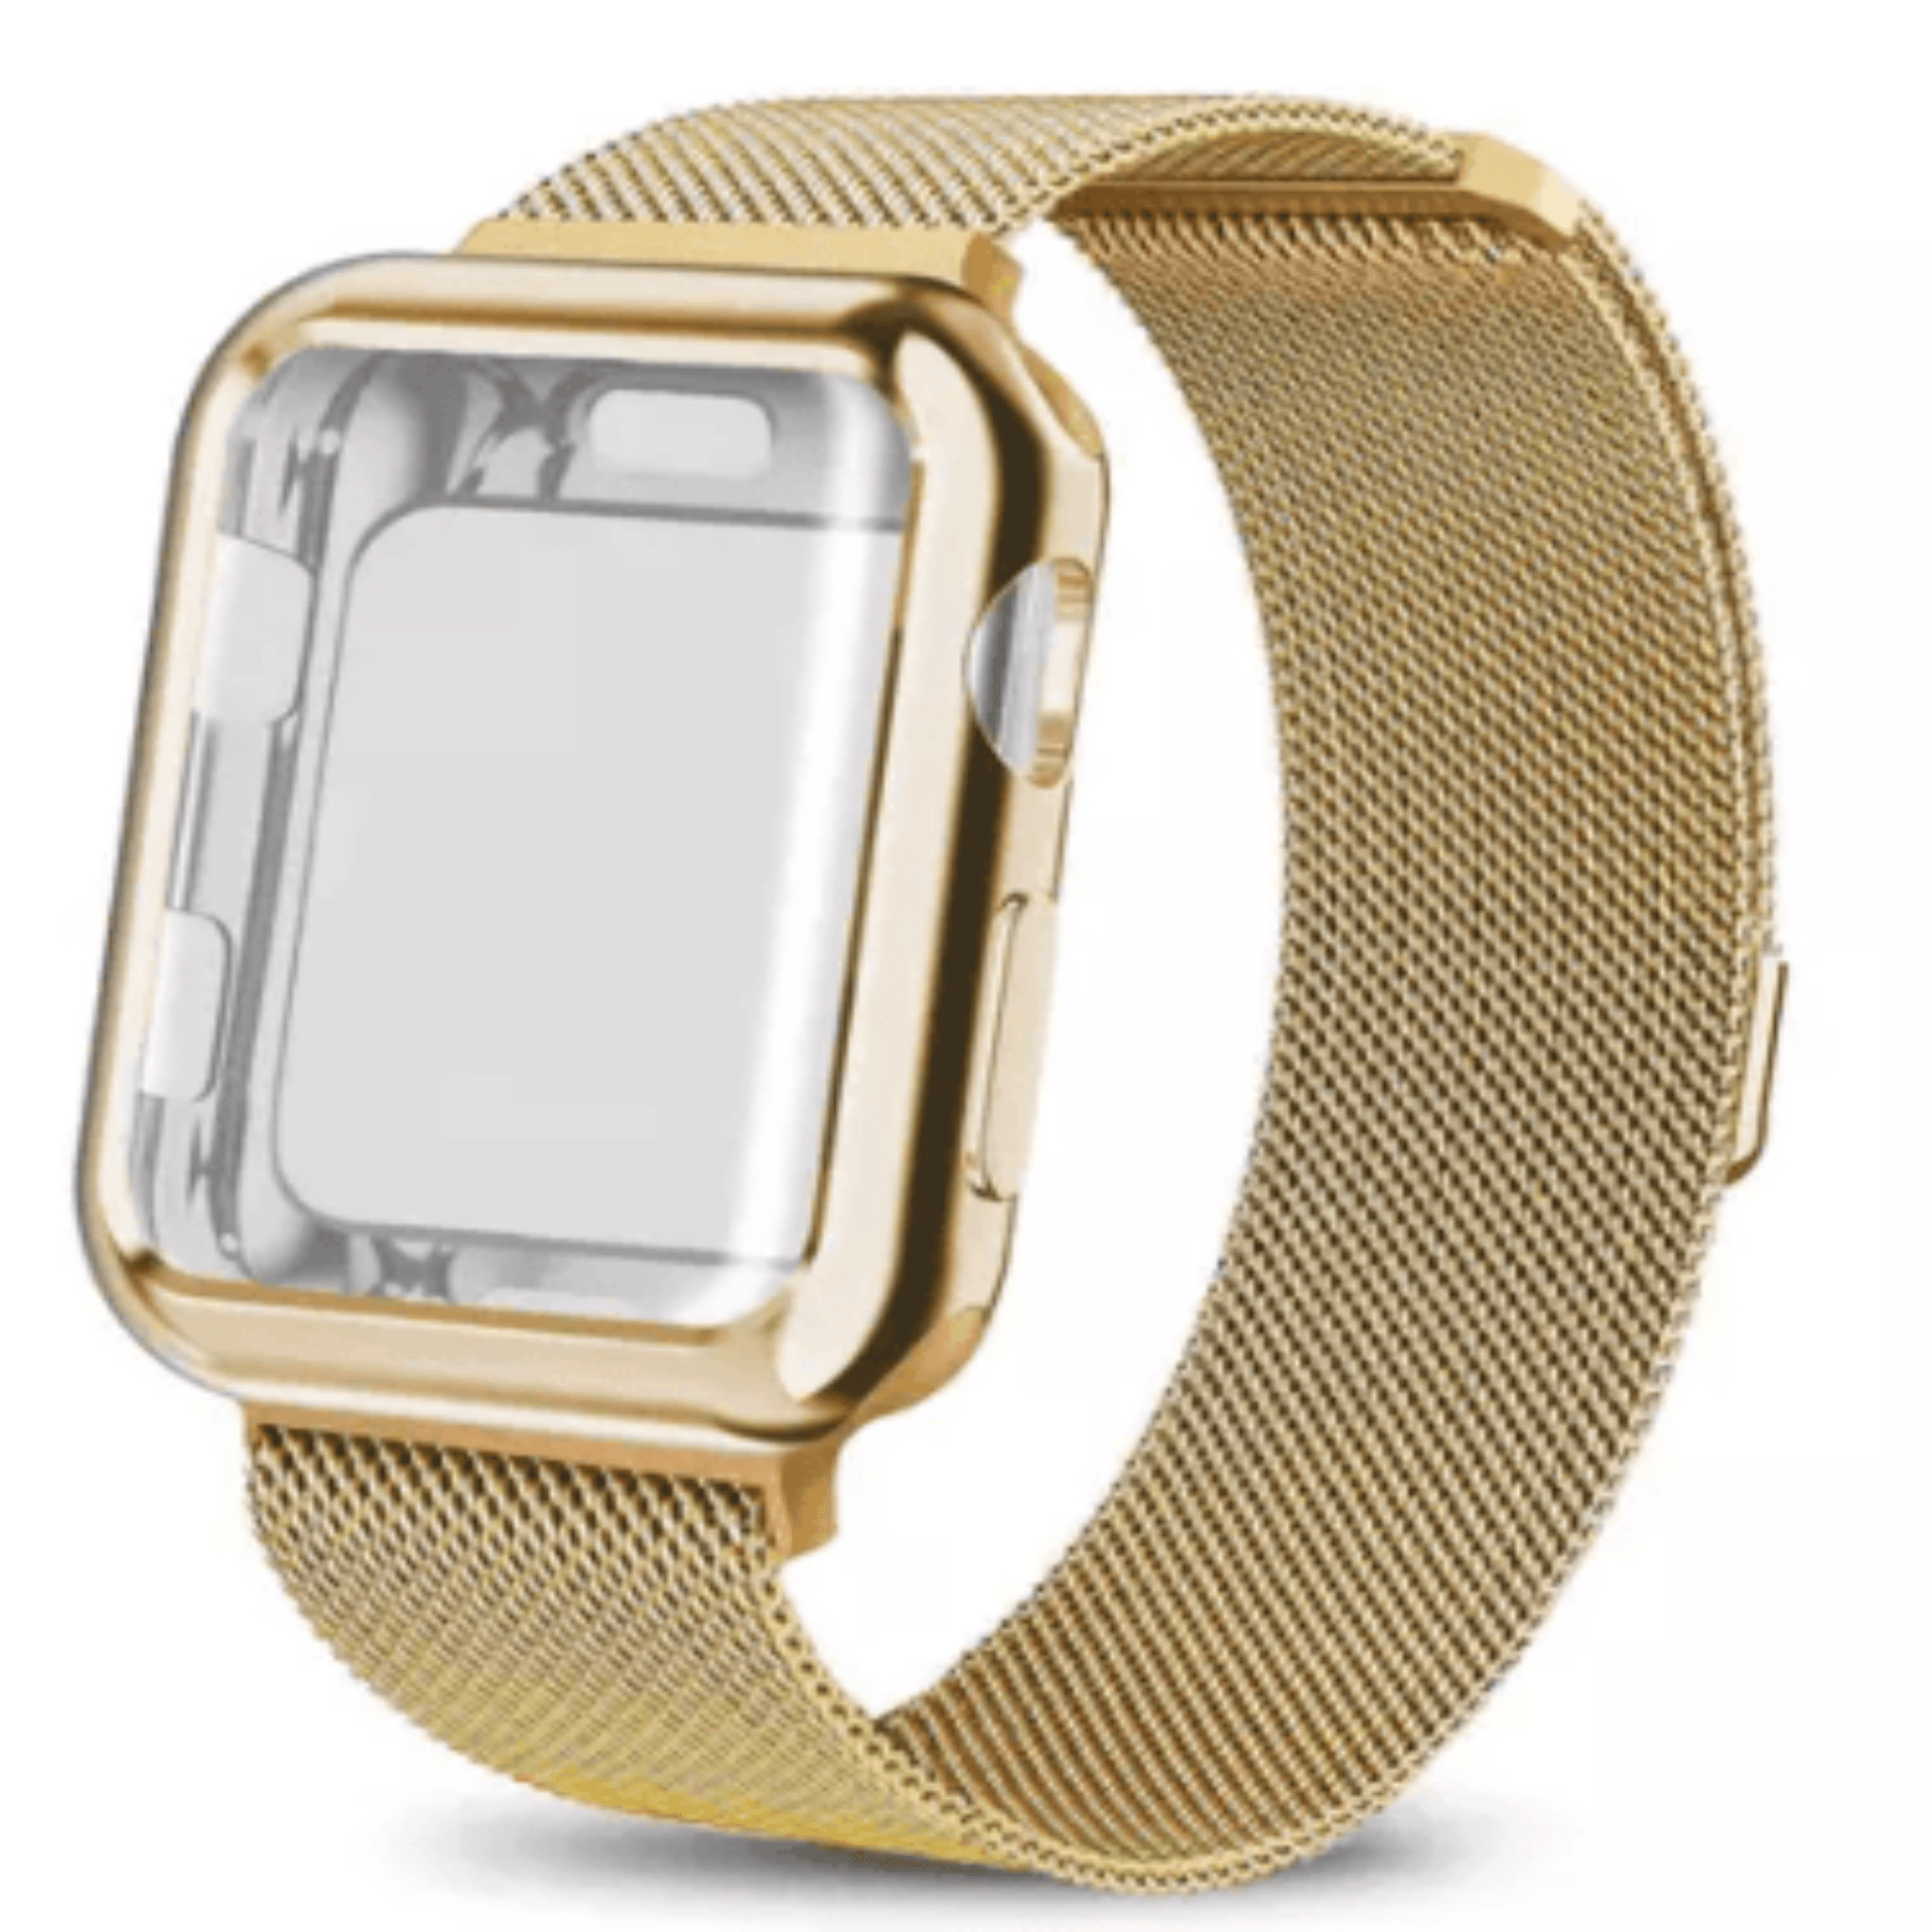 Mesh Milanese Wrist Band Loop W/ Screen Protector Bumper Case For Apple Watch Gold Band & Gold Case Watch Band and Cover Combo Watch Bands Elements Watches